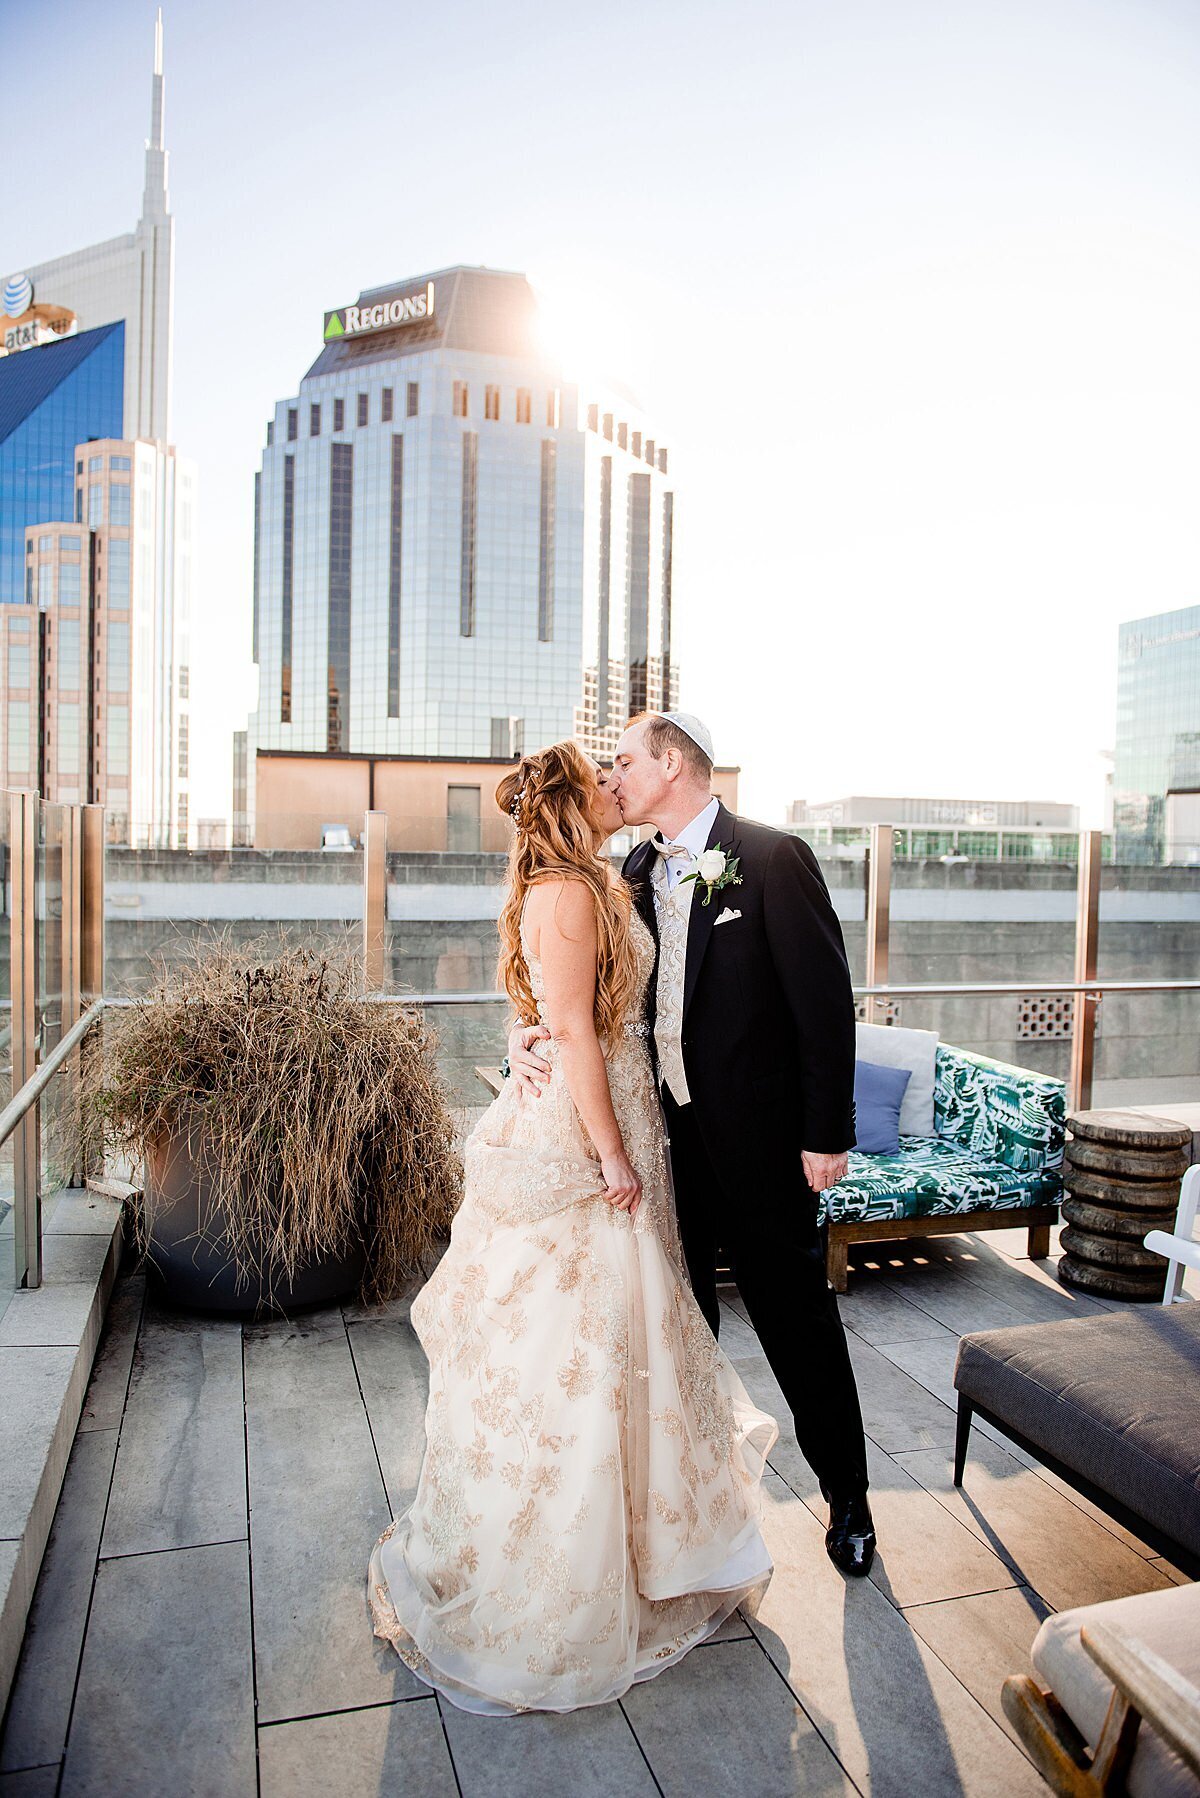 Jewish bride wearing a gold beaded backless gown kisses her Jewish groom wearing a black tuxedo and white yarmulke on the rooftop of the Noelle Hotel in Nashville with the Nashville Skyline behind them.